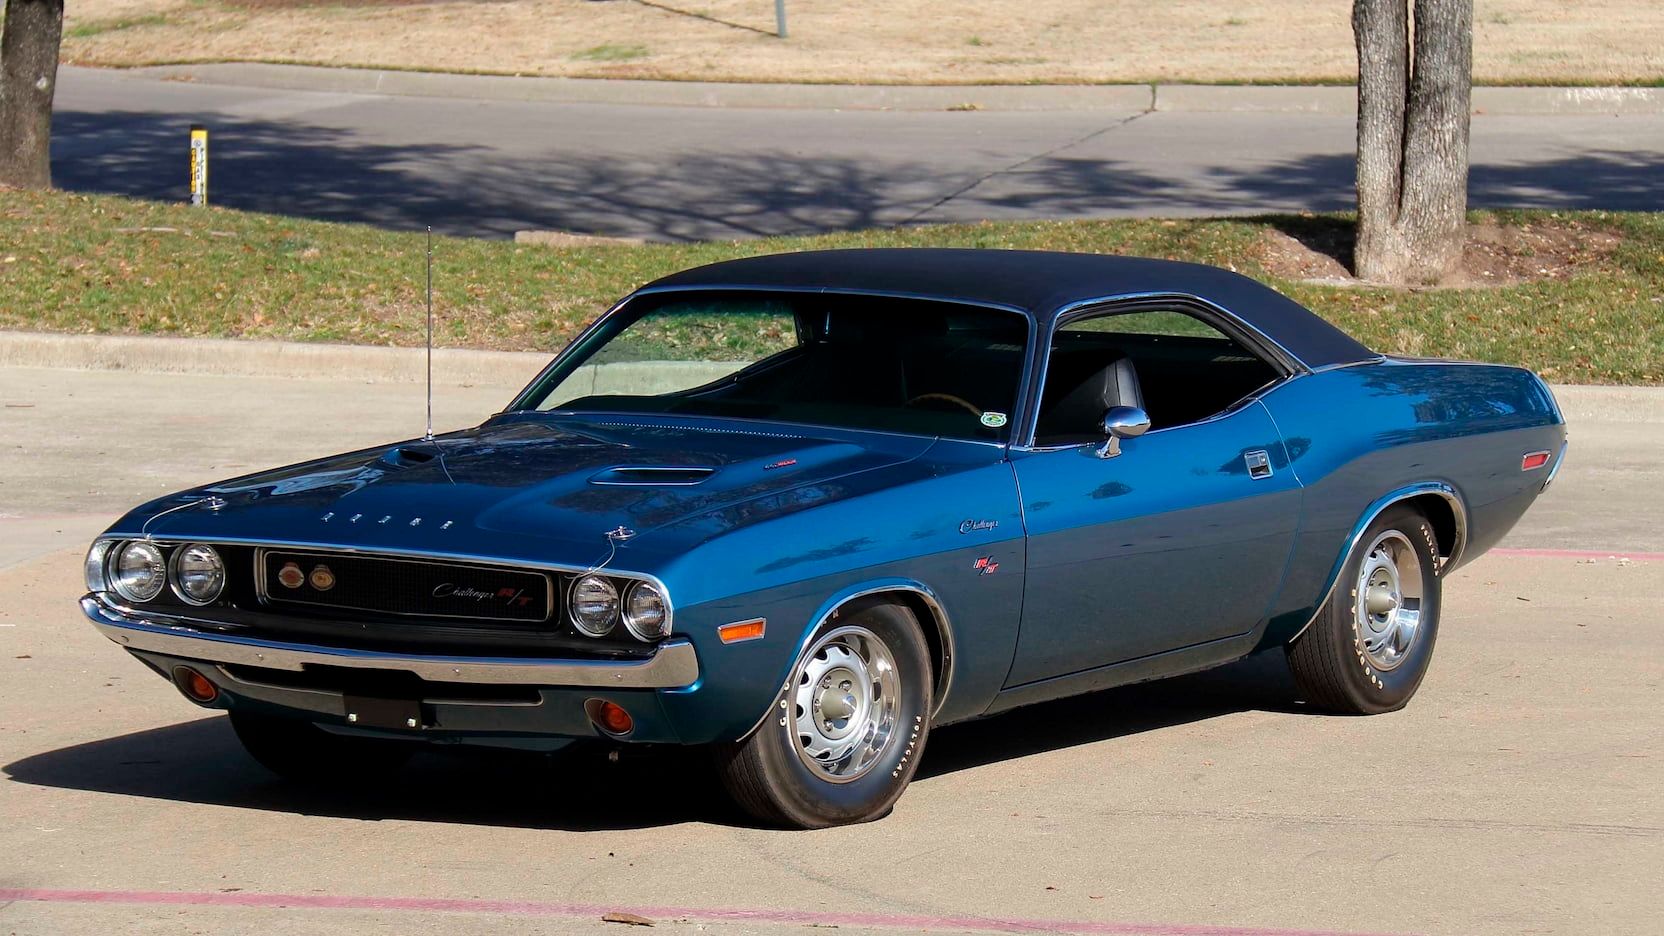 The 10 Best Dodge Models of All Time (Part 5 of the Top 50 Dodge